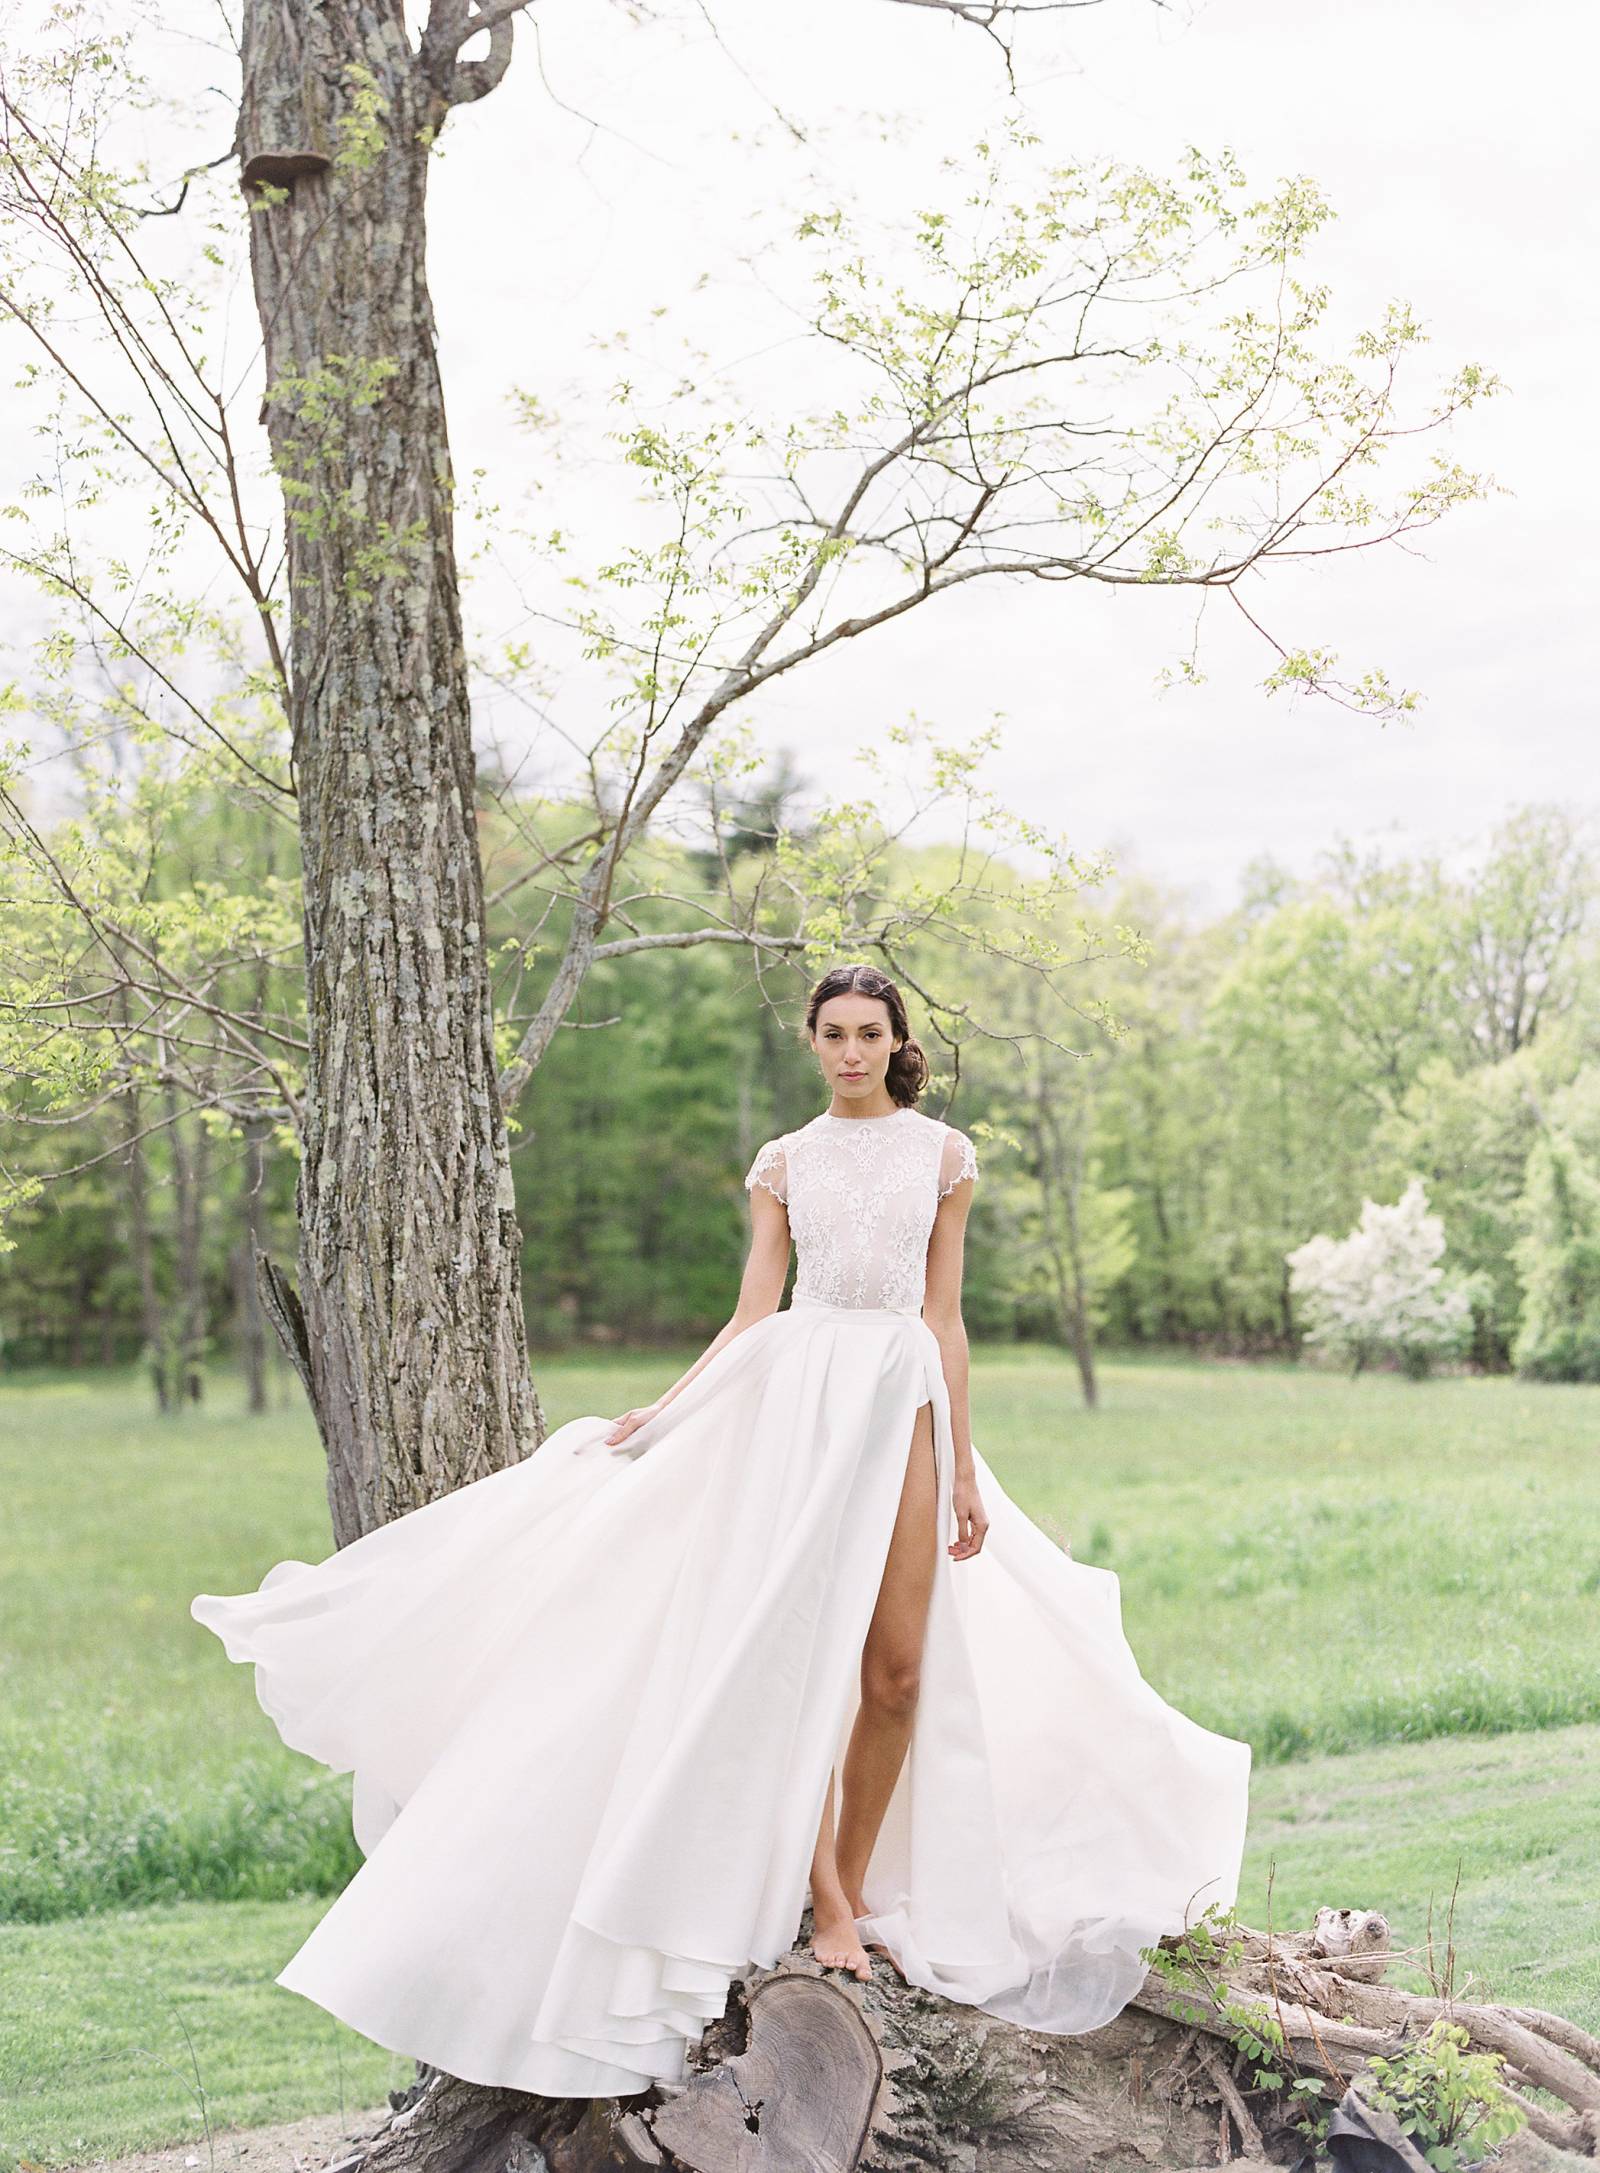 A Whimsical Floral Workshop at Ham House by Ariella Chezar | New York ...